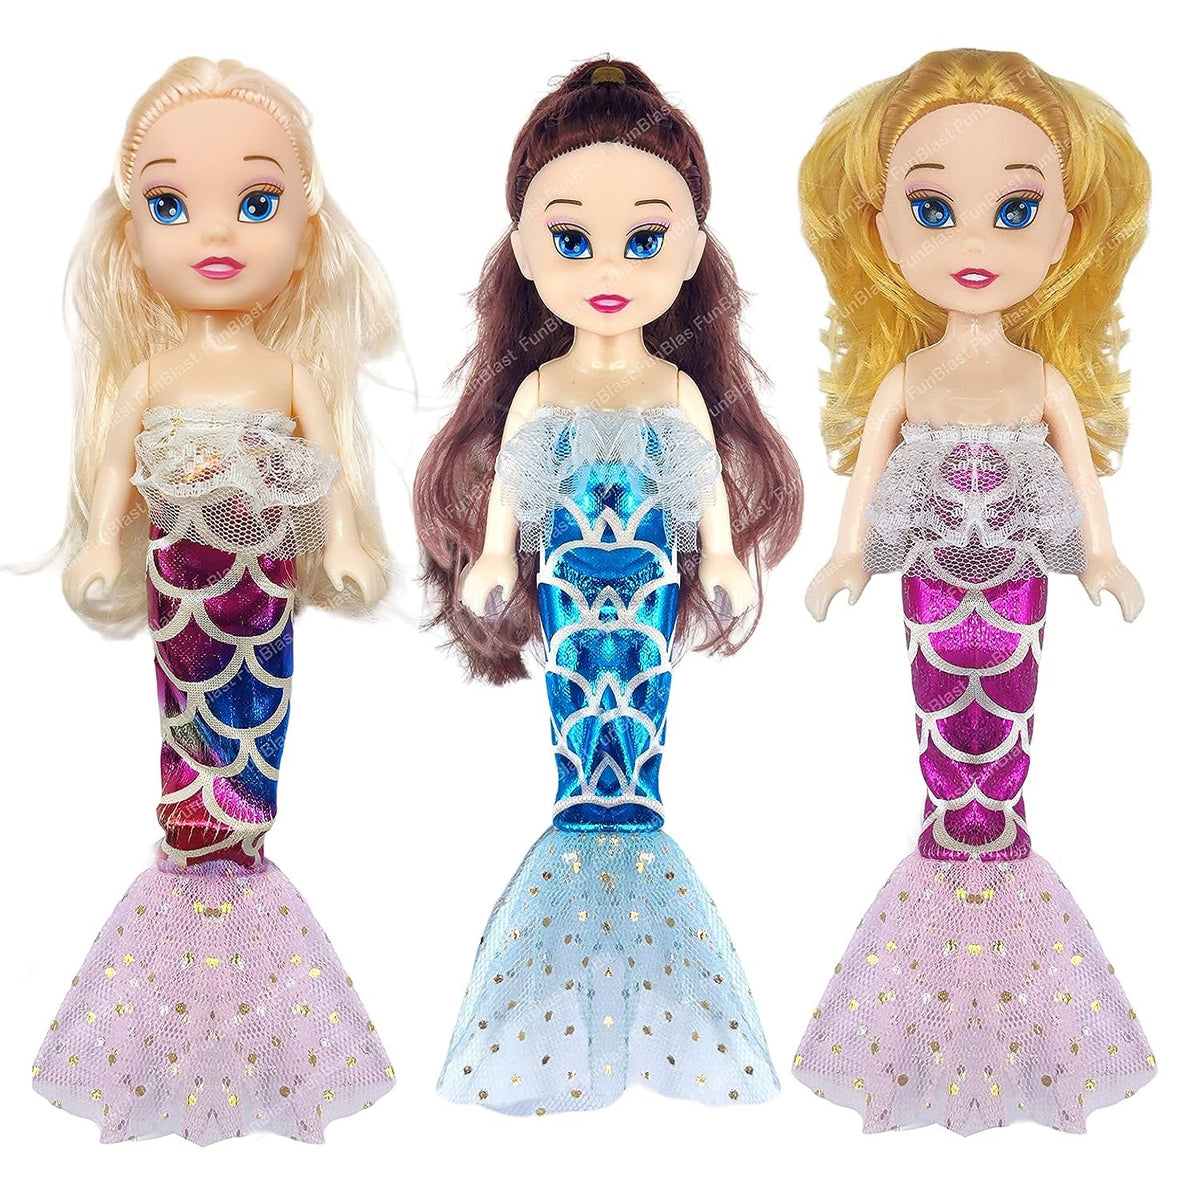 Mermaid Doll Toys for Kids (Pack of 3 Pcs)- Doll Set for Girls- 20 CM Cute Realistic Dolls for Girls, Cute Dolls for Girls, Doll Toys for Kids (3 Pcs) (Dress Color May Vary)